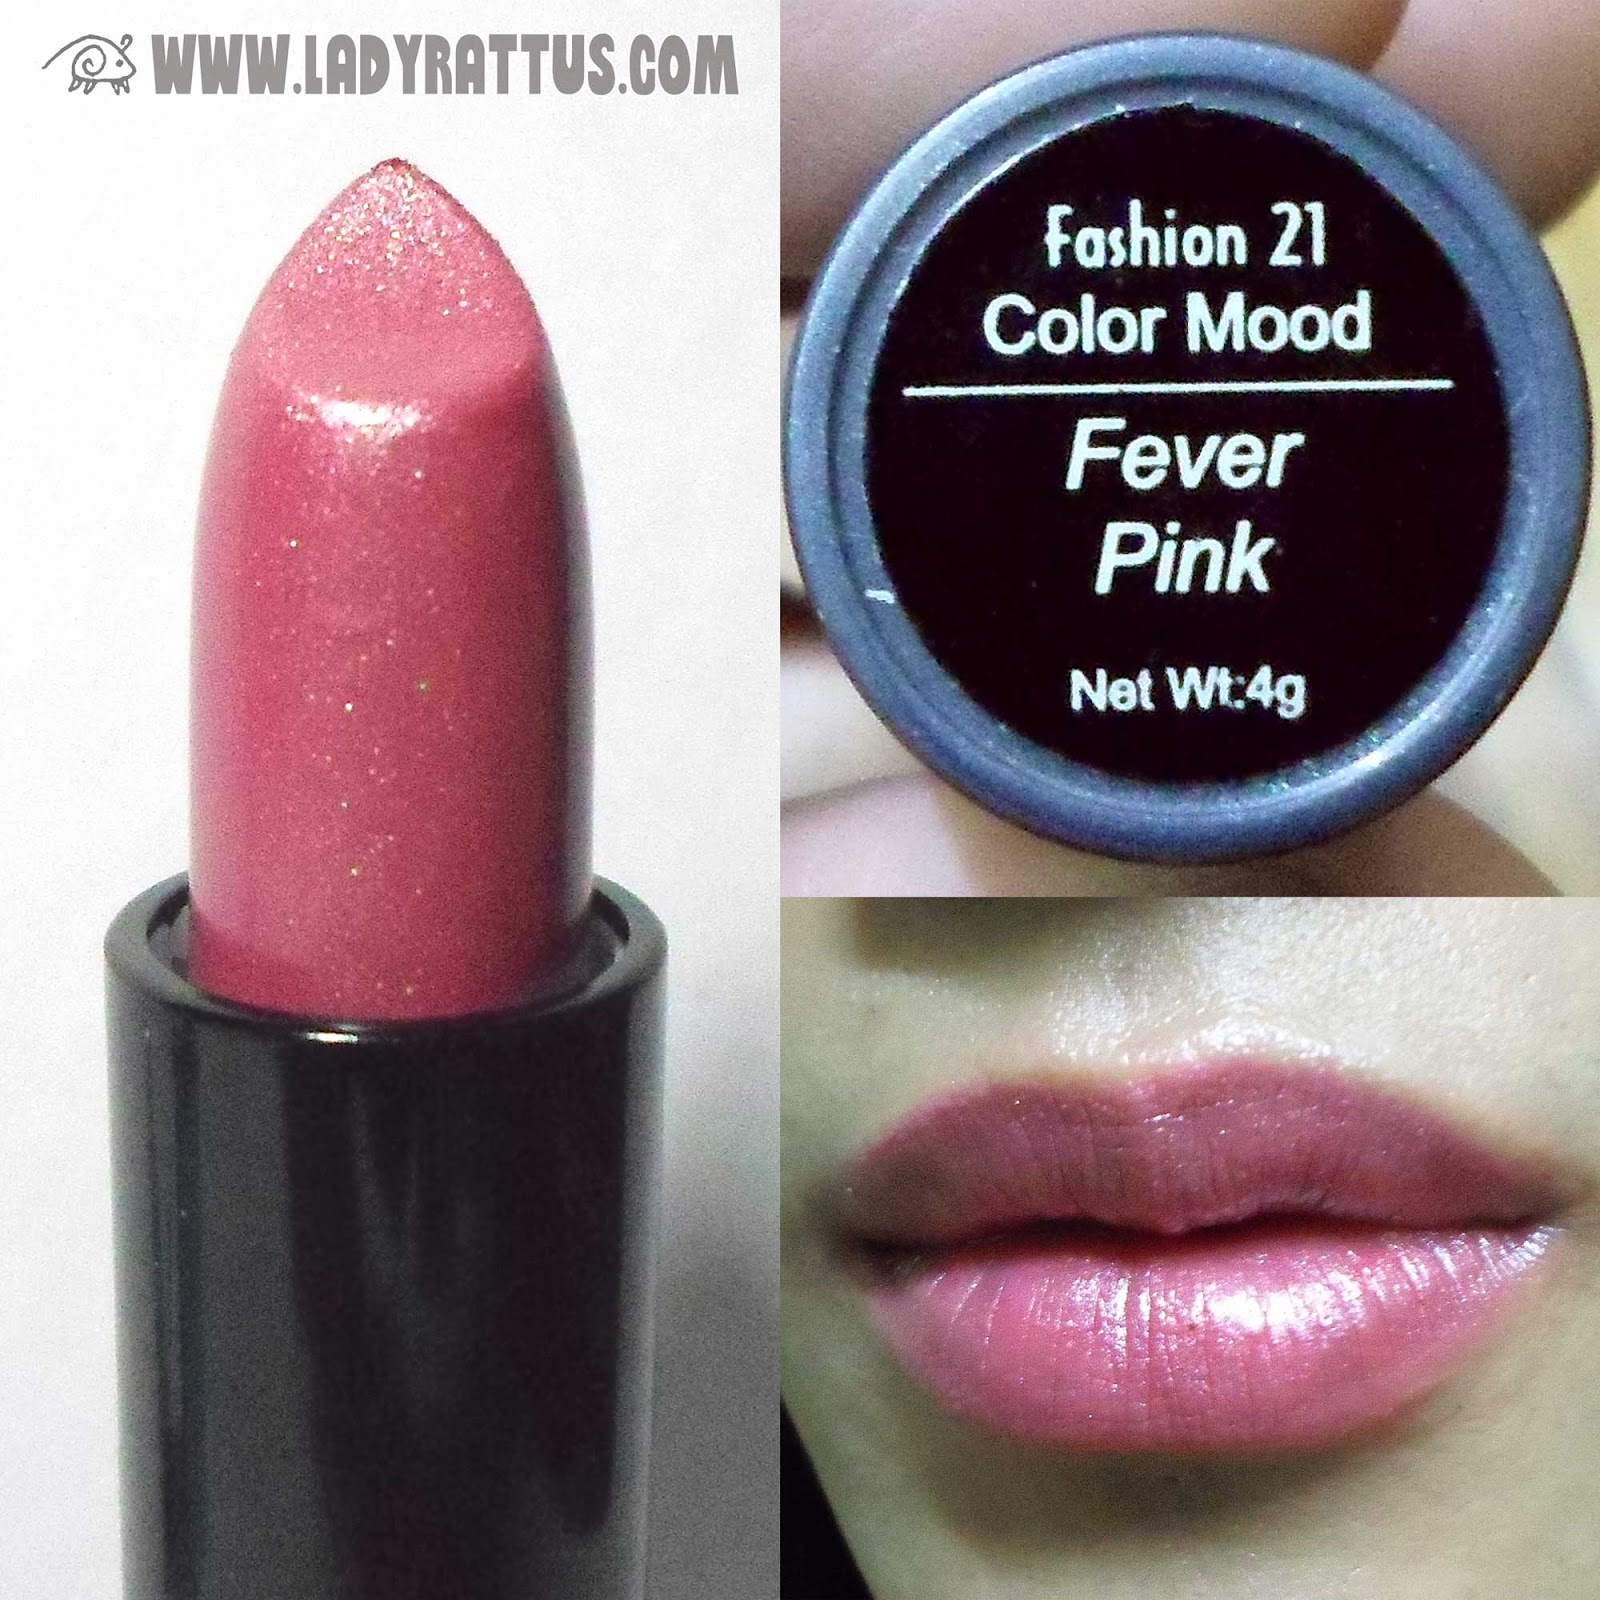 Fashion 21 Color Mood Lipstick in Fever Pink